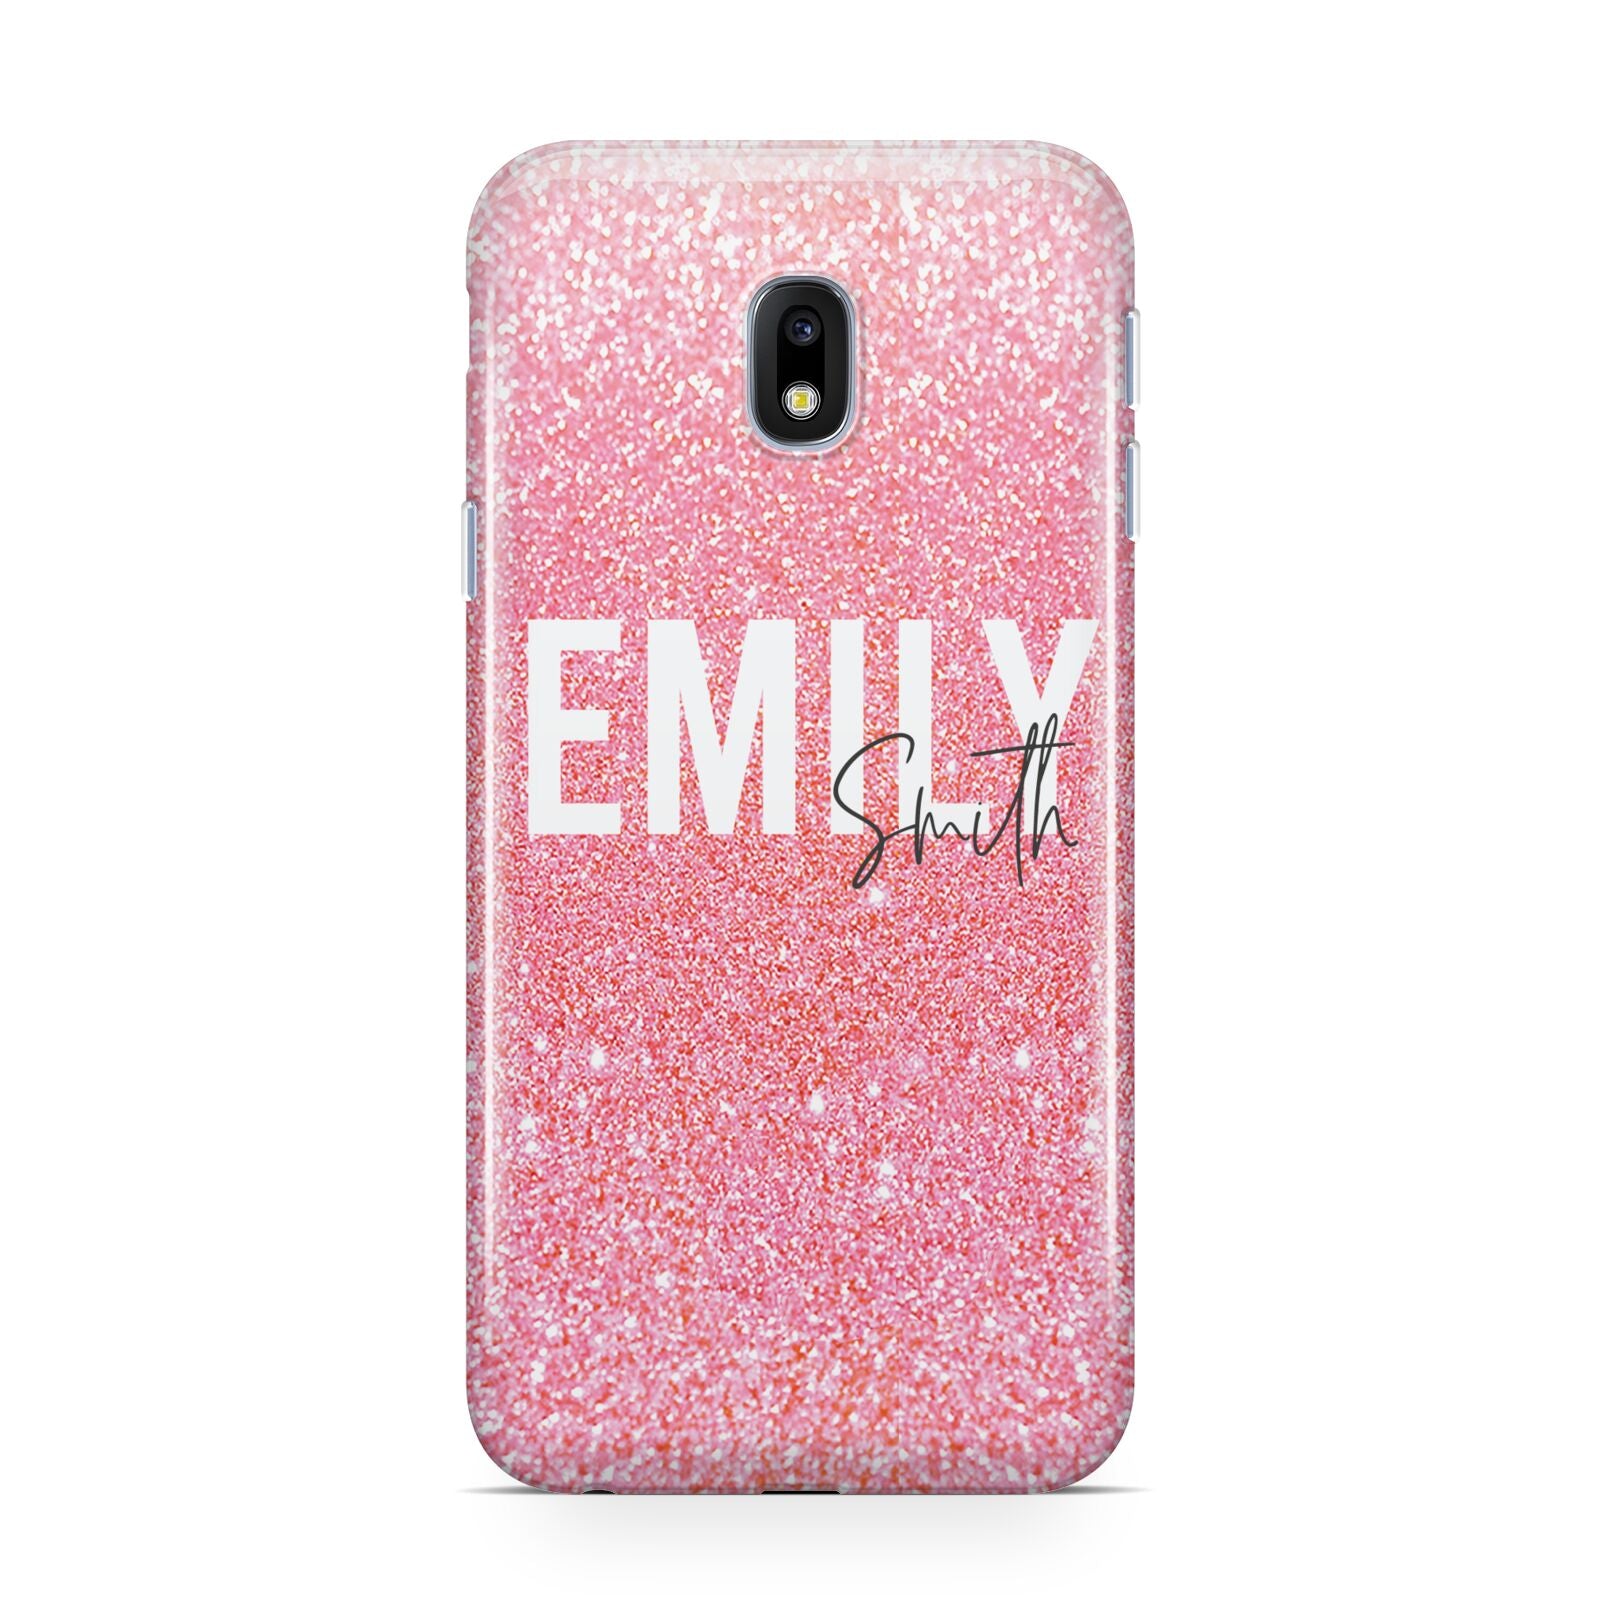 Personalised Pink Glitter White Name Samsung Galaxy J3 2017 Case